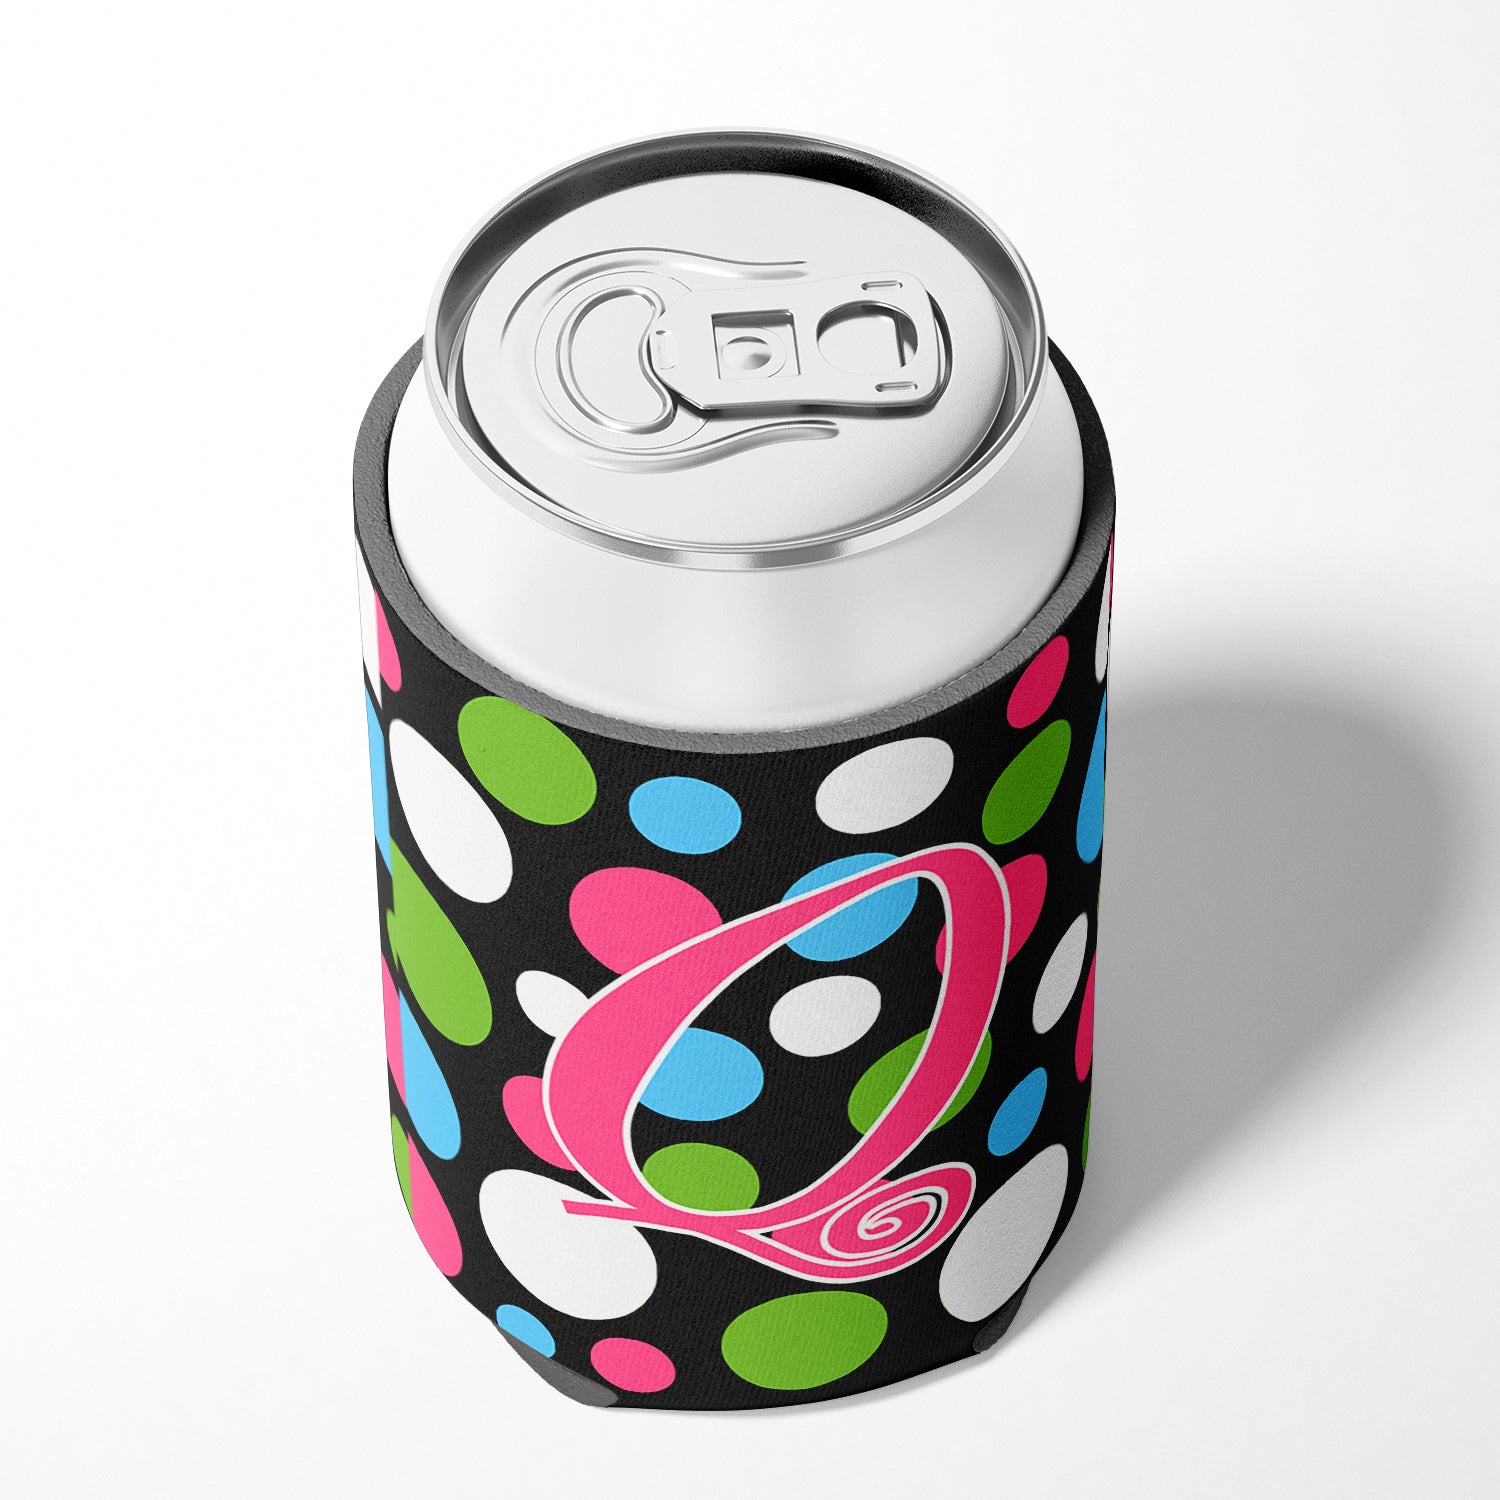 Letter Q Initial Monogram - Polkadots and Pink Can or Bottle Beverage Insulator Hugger.